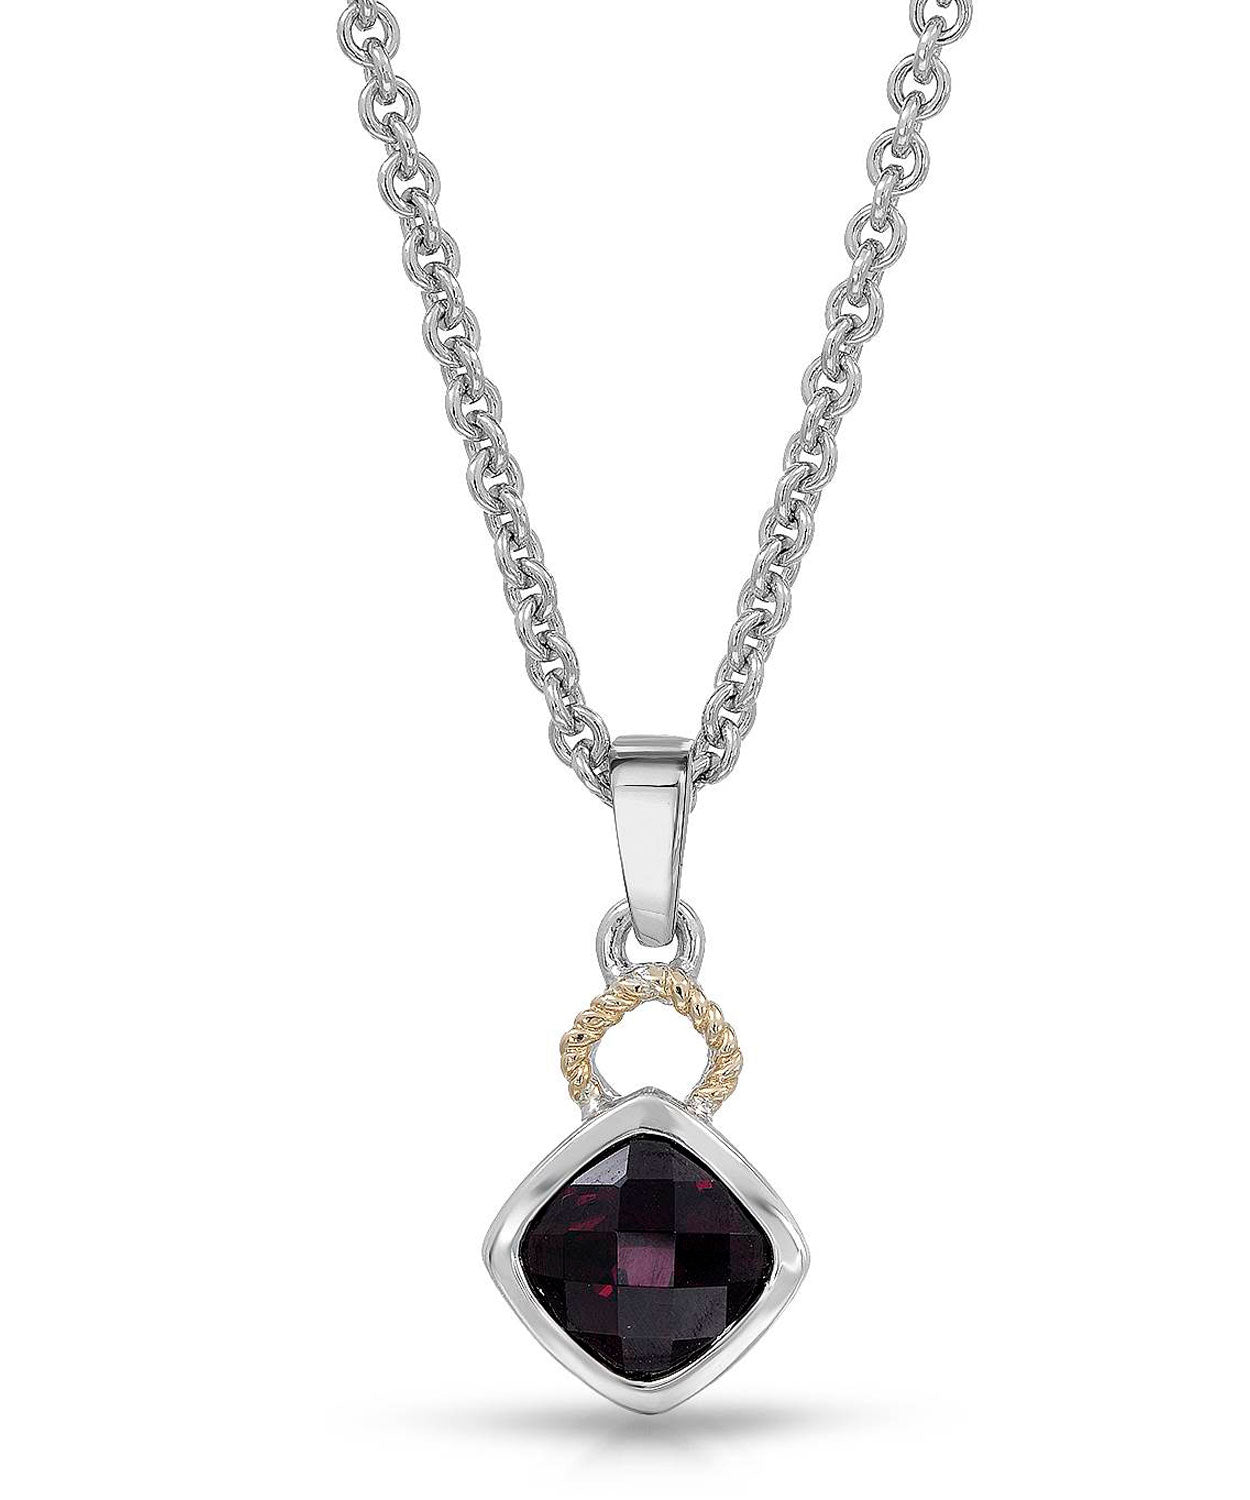 Colore by Simon Golub 3.70 ctw Natural Rhodolite Garnet Rhodium Plated 925 Sterling Silver Pendant With Chain - With 18k Gold Inlay View 1